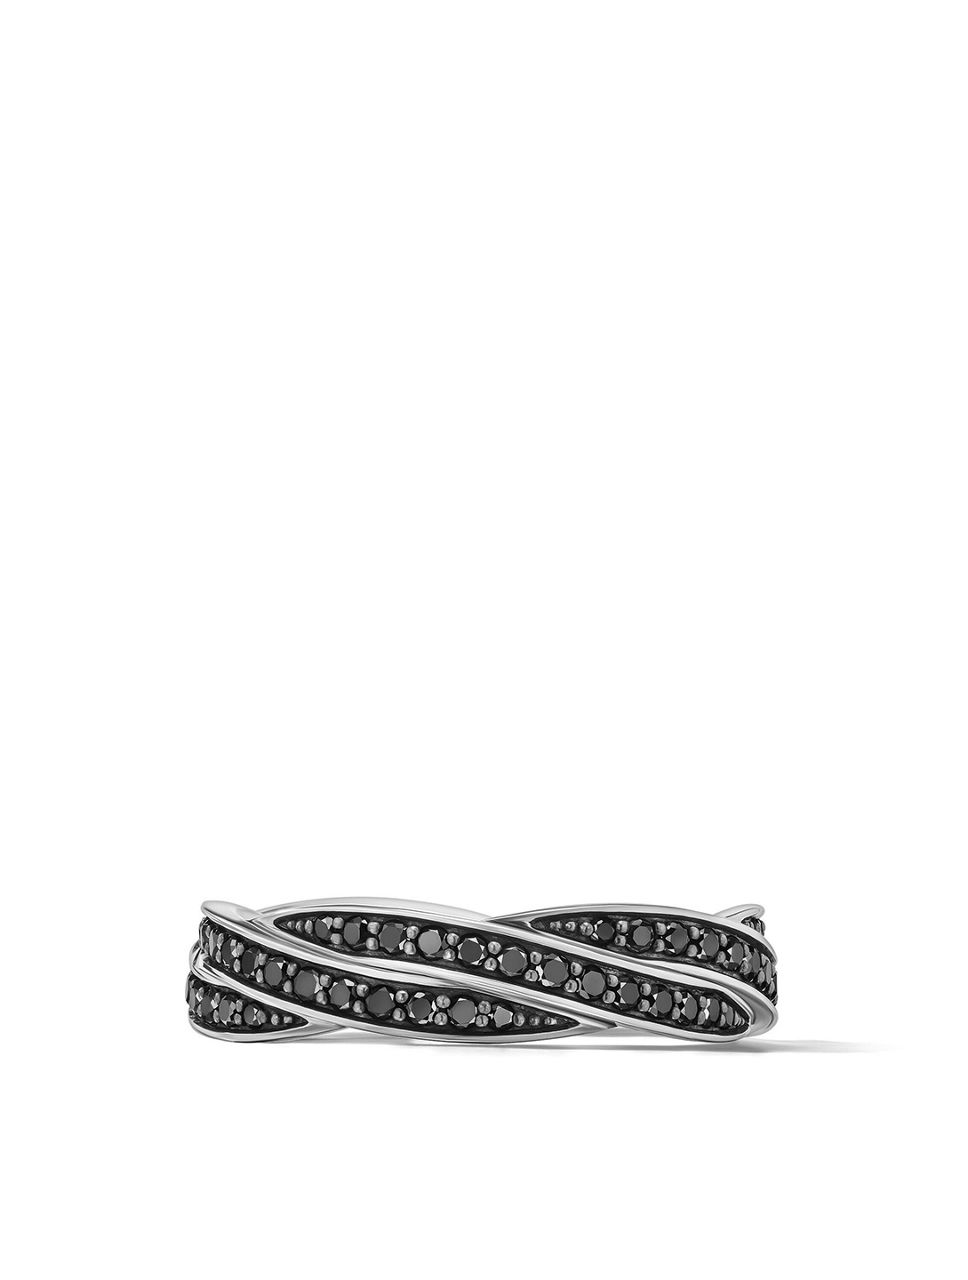 Dy Helios™ Band Ring Sterling Silver With Black Diamonds, 6mm